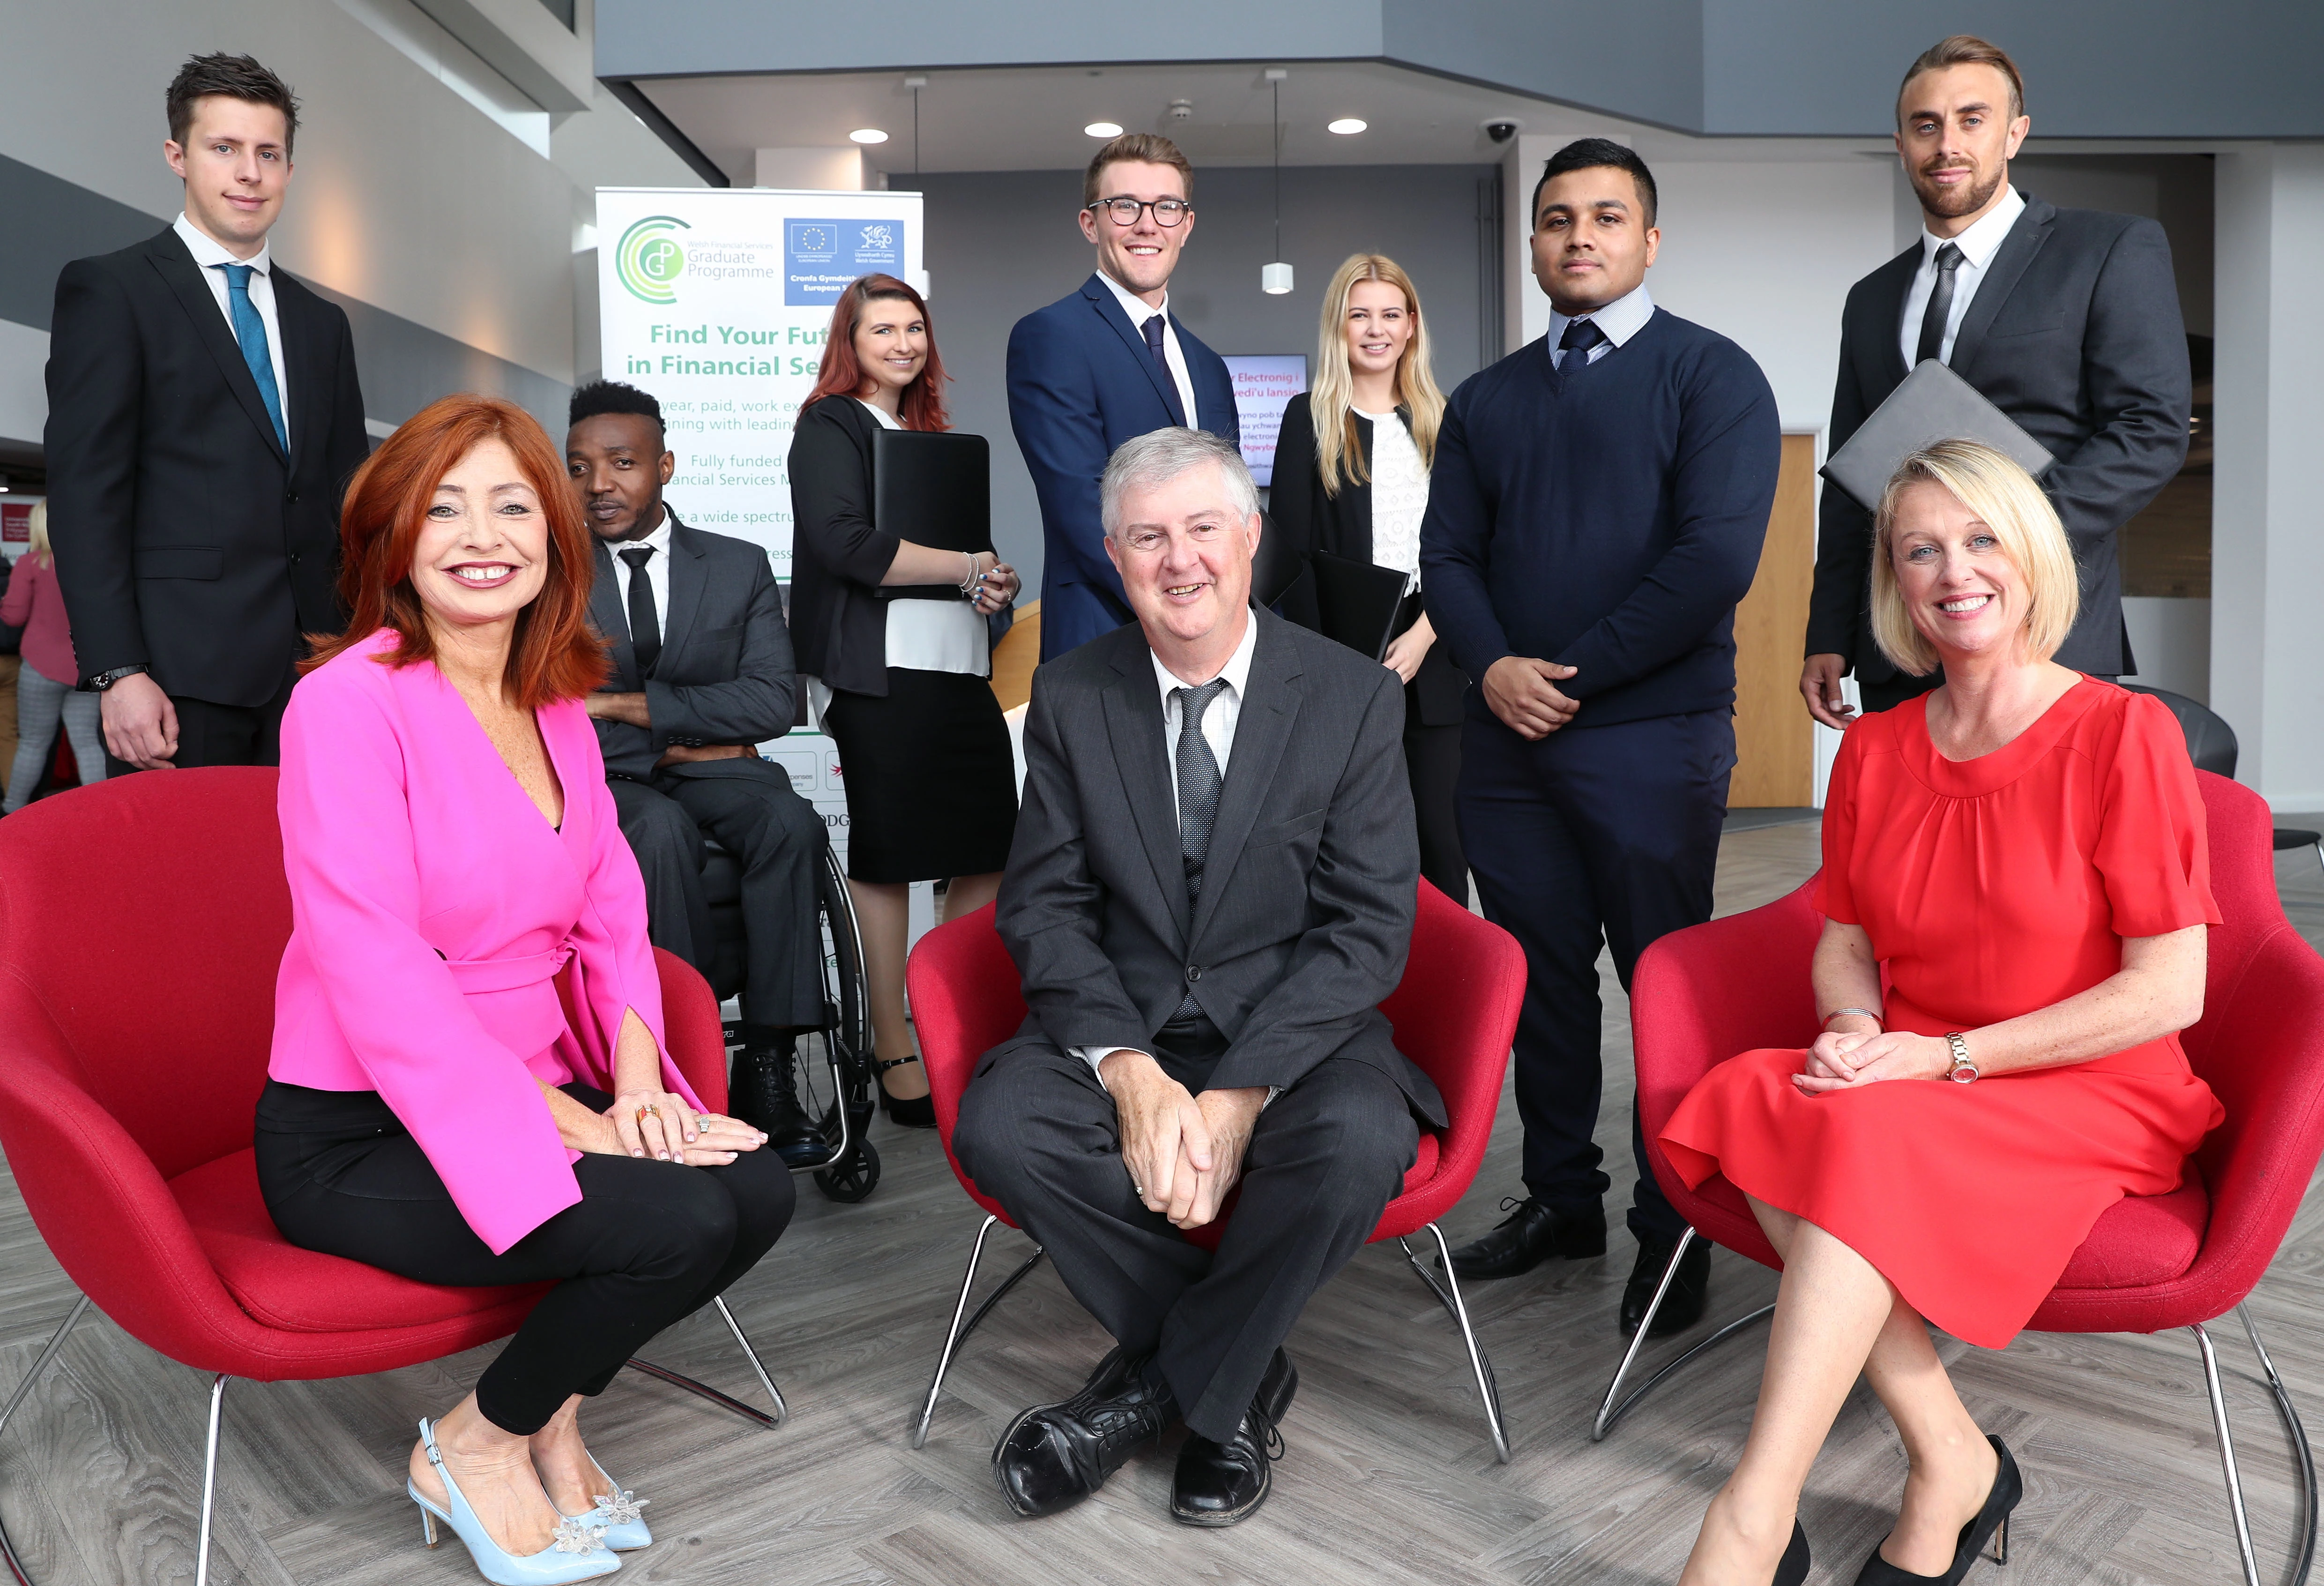 Minister Mark Drakeford joins organisers and graduates from the Welsh Financial Services Graduate Programme